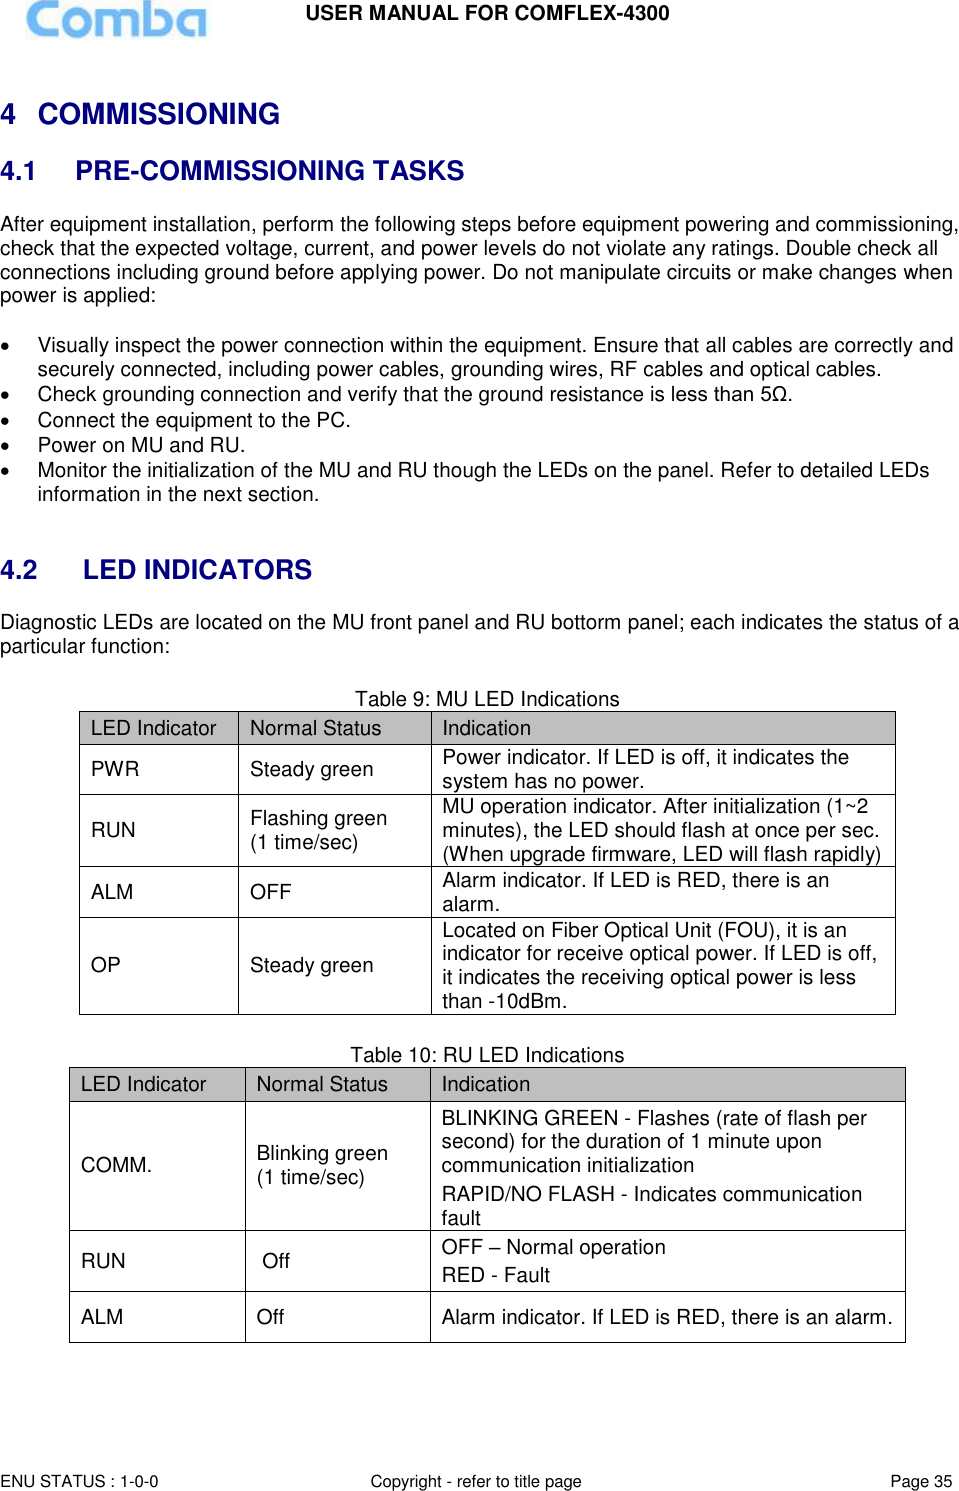 USER MANUAL FOR COMFLEX-4300  ENU STATUS : 1-0-0 Copyright - refer to title page Page 35      4  COMMISSIONING 4.1 PRE-COMMISSIONING TASKS After equipment installation, perform the following steps before equipment powering and commissioning, check that the expected voltage, current, and power levels do not violate any ratings. Double check all connections including ground before applying power. Do not manipulate circuits or make changes when power is applied:    Visually inspect the power connection within the equipment. Ensure that all cables are correctly and securely connected, including power cables, grounding wires, RF cables and optical cables.    Check grounding connection and verify that the ground resistance is less than 5Ω.   Connect the equipment to the PC.    Power on MU and RU.   Monitor the initialization of the MU and RU though the LEDs on the panel. Refer to detailed LEDs information in the next section.   4.2   LED INDICATORS Diagnostic LEDs are located on the MU front panel and RU bottorm panel; each indicates the status of a particular function:  Table 9: MU LED Indications LED Indicator Normal Status Indication PWR Steady green Power indicator. If LED is off, it indicates the system has no power.  RUN Flashing green (1 time/sec) MU operation indicator. After initialization (1~2 minutes), the LED should flash at once per sec. (When upgrade firmware, LED will flash rapidly)  ALM OFF Alarm indicator. If LED is RED, there is an alarm. OP Steady green Located on Fiber Optical Unit (FOU), it is an indicator for receive optical power. If LED is off, it indicates the receiving optical power is less than -10dBm.  Table 10: RU LED Indications LED Indicator Normal Status Indication COMM. Blinking green (1 time/sec) BLINKING GREEN - Flashes (rate of flash per second) for the duration of 1 minute upon communication initialization RAPID/NO FLASH - Indicates communication fault RUN  Off OFF – Normal operation RED - Fault ALM Off Alarm indicator. If LED is RED, there is an alarm.  